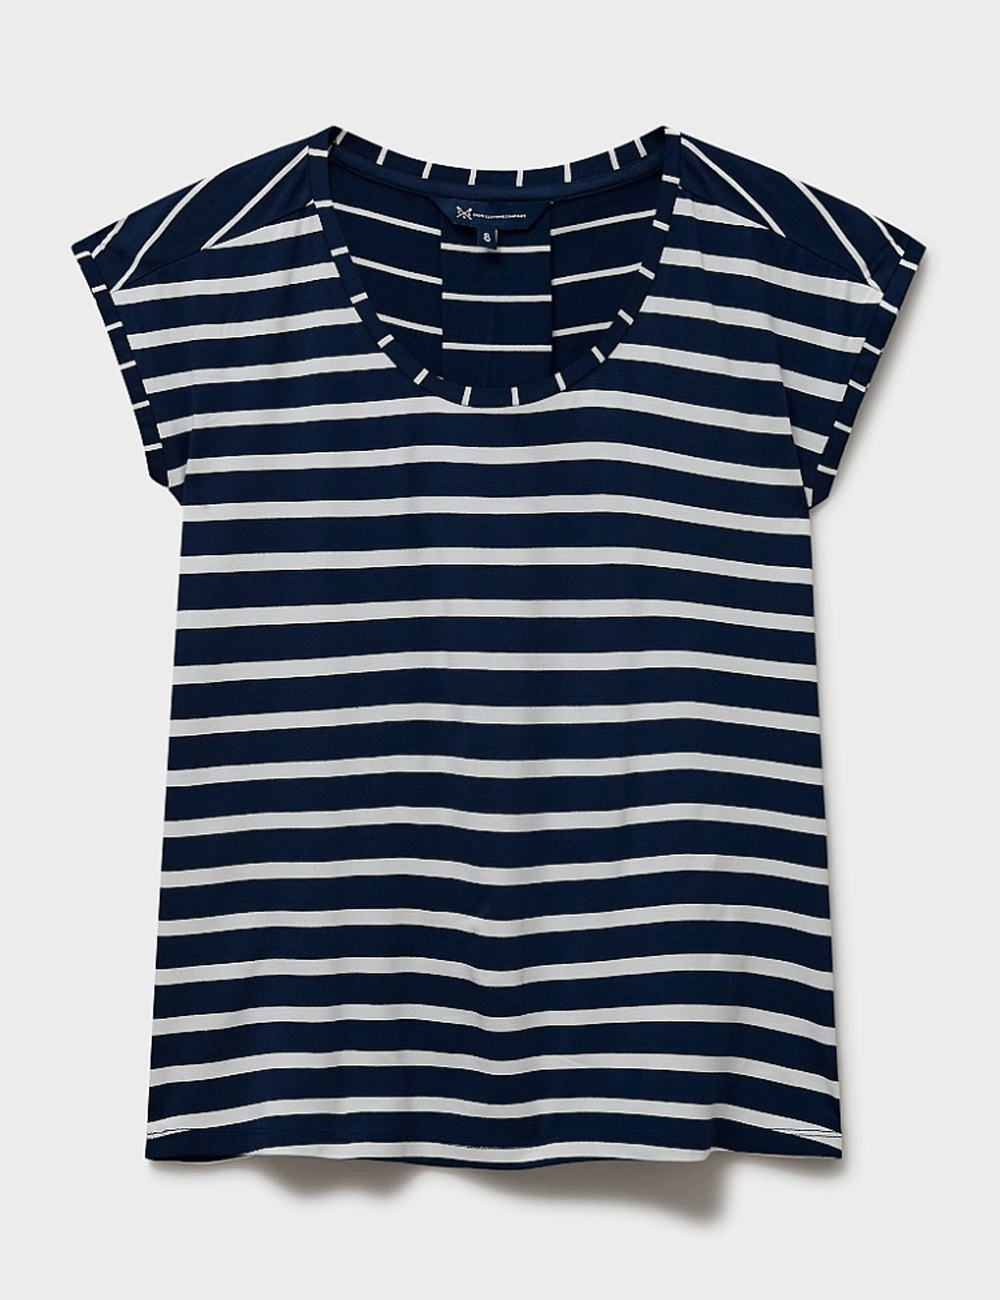 Crew Clothing Ruby Top in Navy/White on a grey background